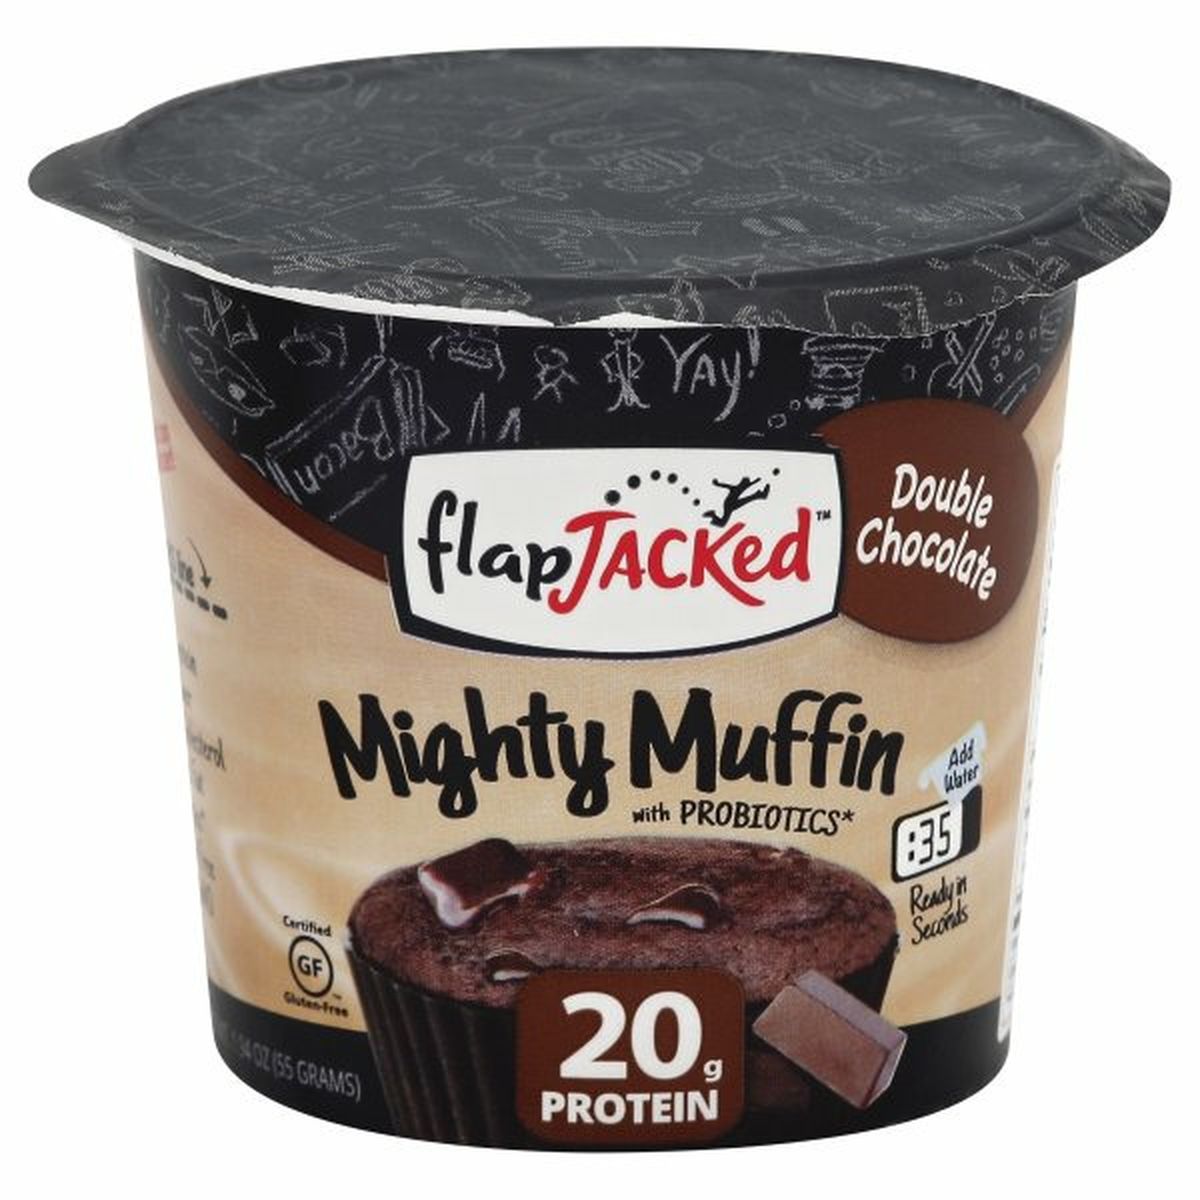 Calories in FlapJacked Mighty Muffin, Double Chocolate